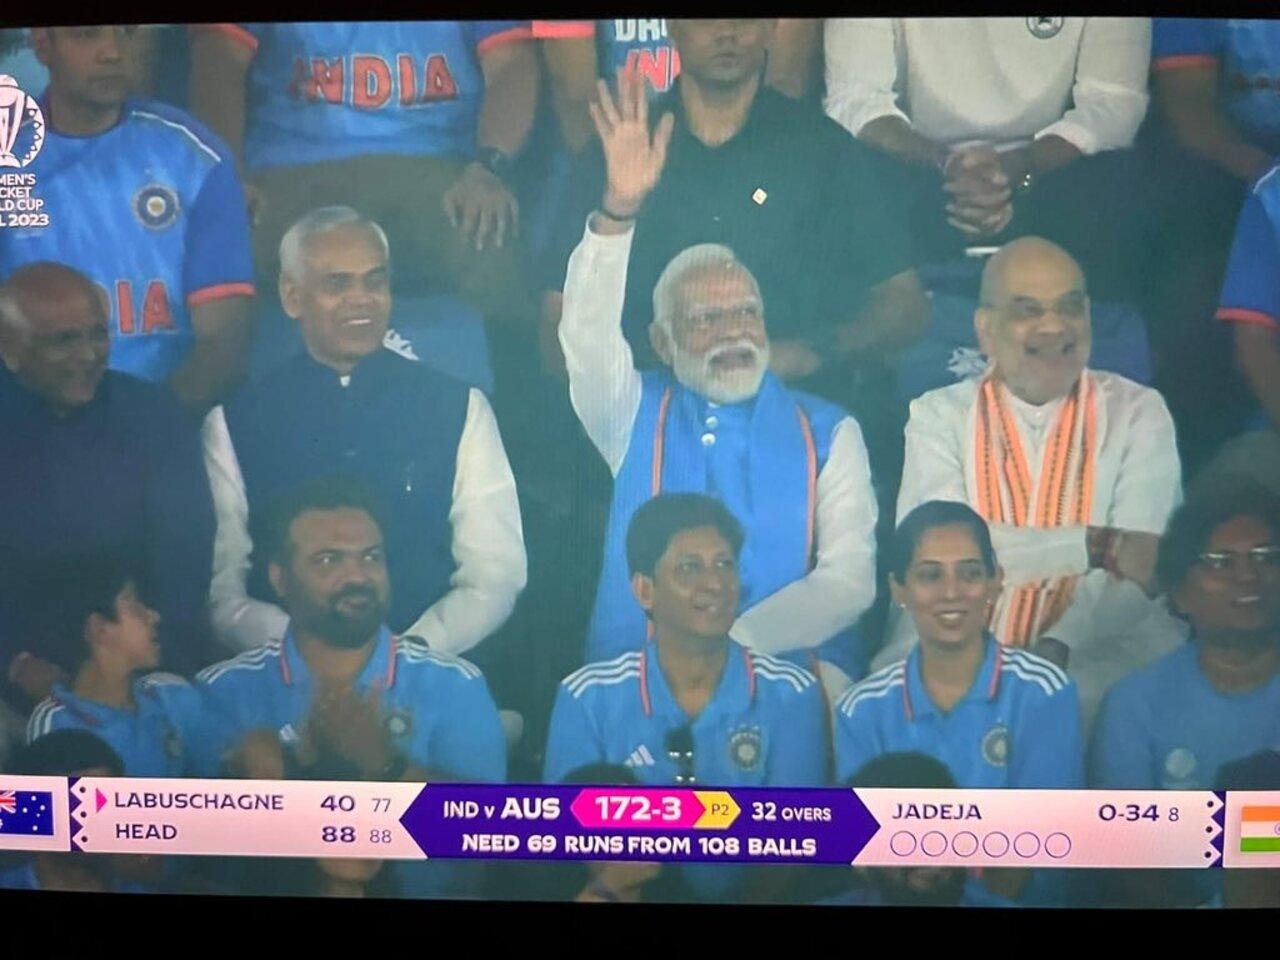 PM Narendra Modi arrived for the match after the first innings. He was seen waving to the crowd as they chanted his name. He also presented the trophy to the Australian team post match